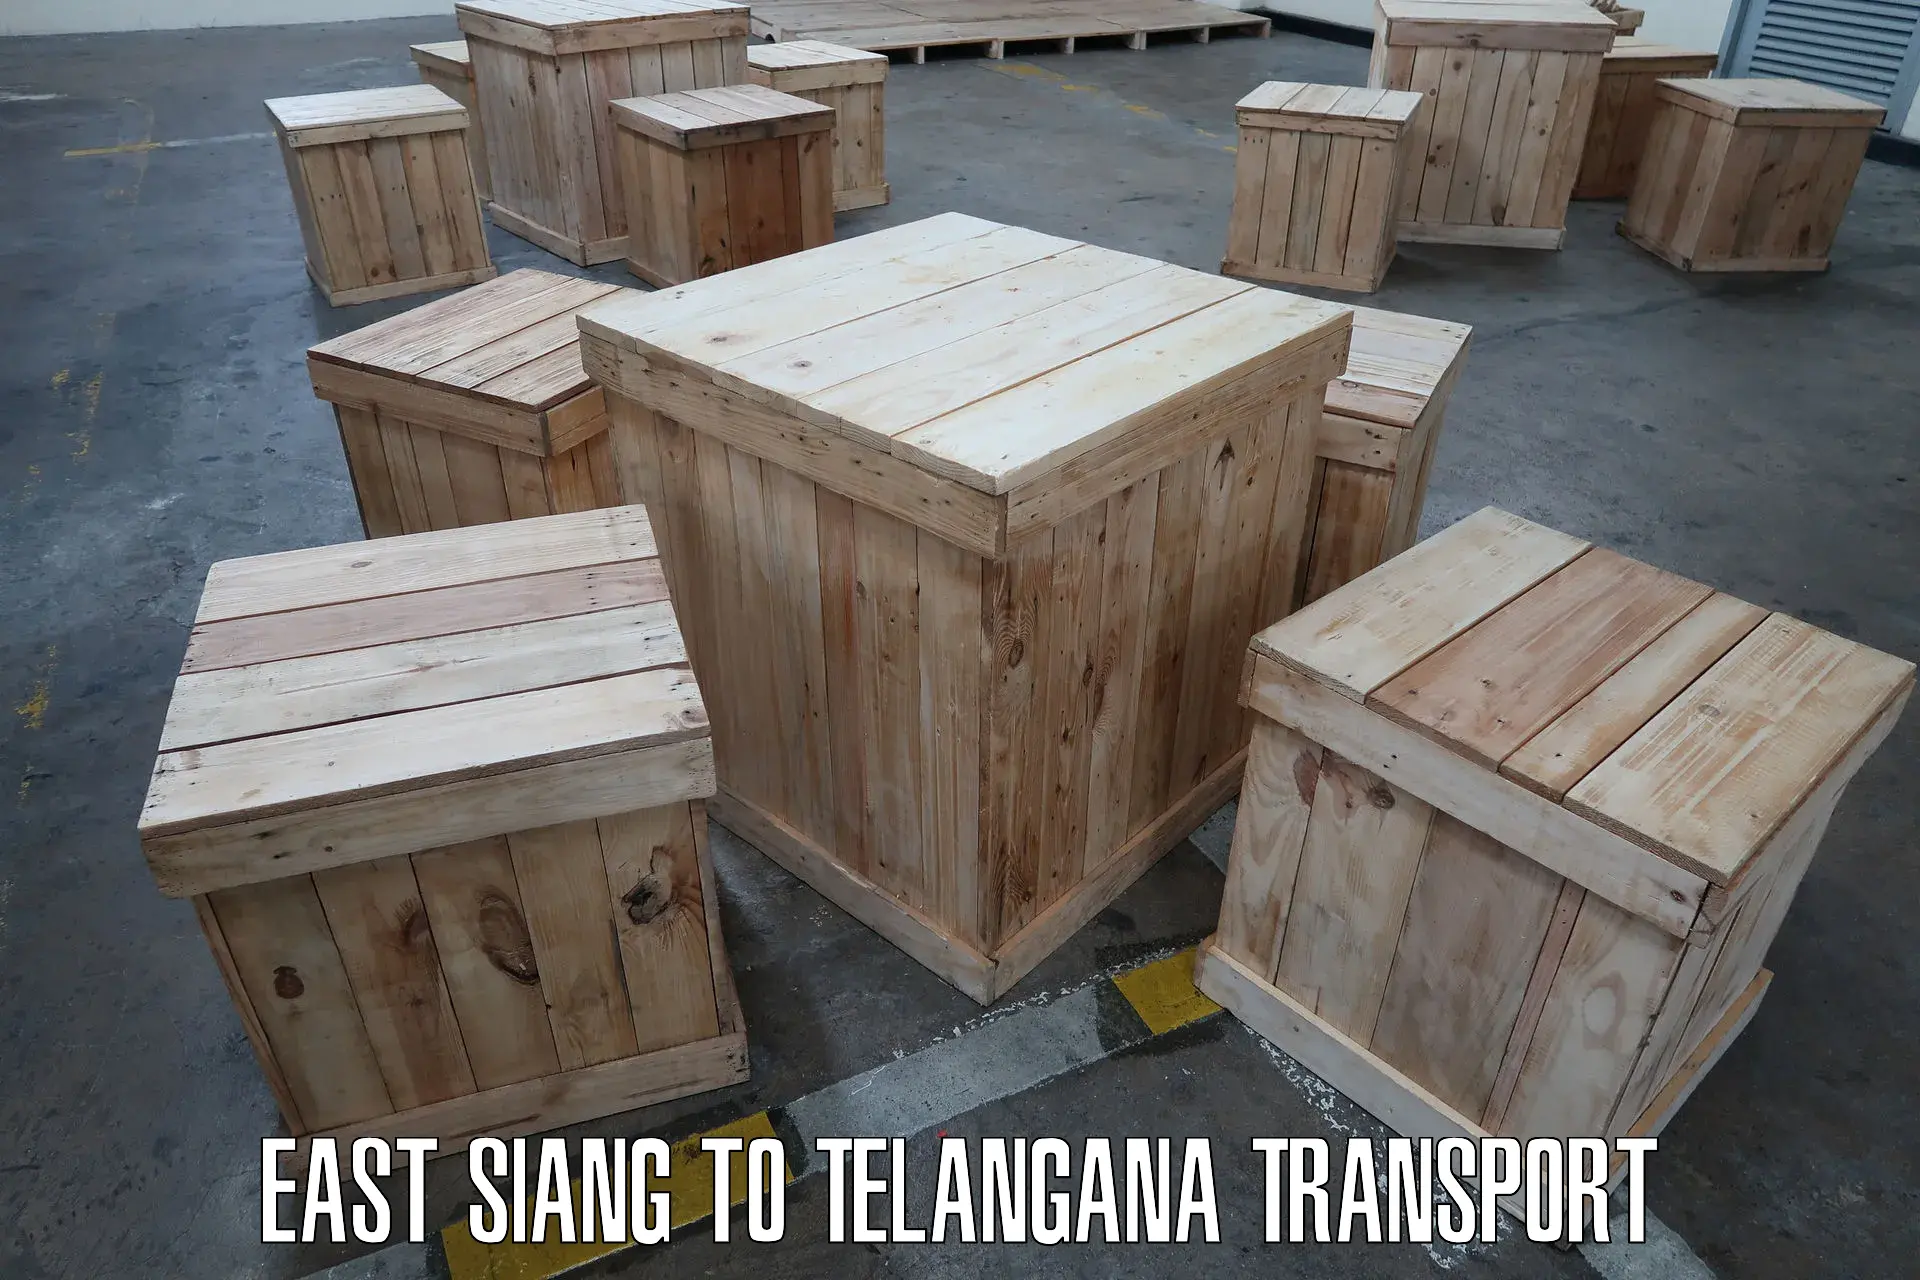 Transport in sharing in East Siang to Shankarpalle